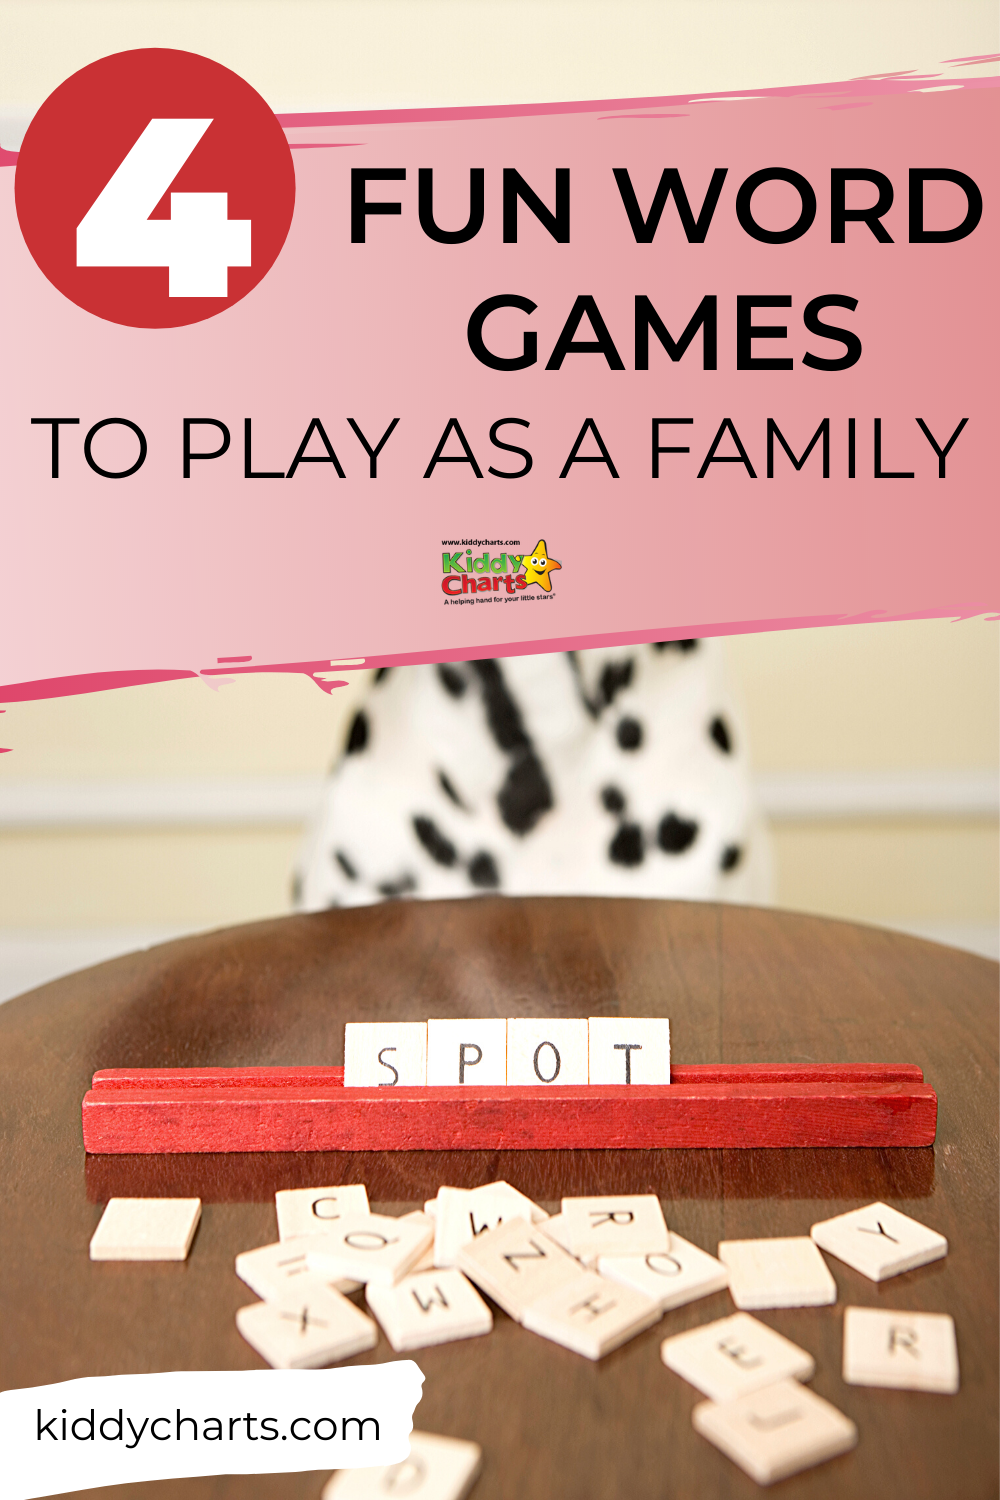 4-fun-word-games-to-play-as-a-family-kiddycharts